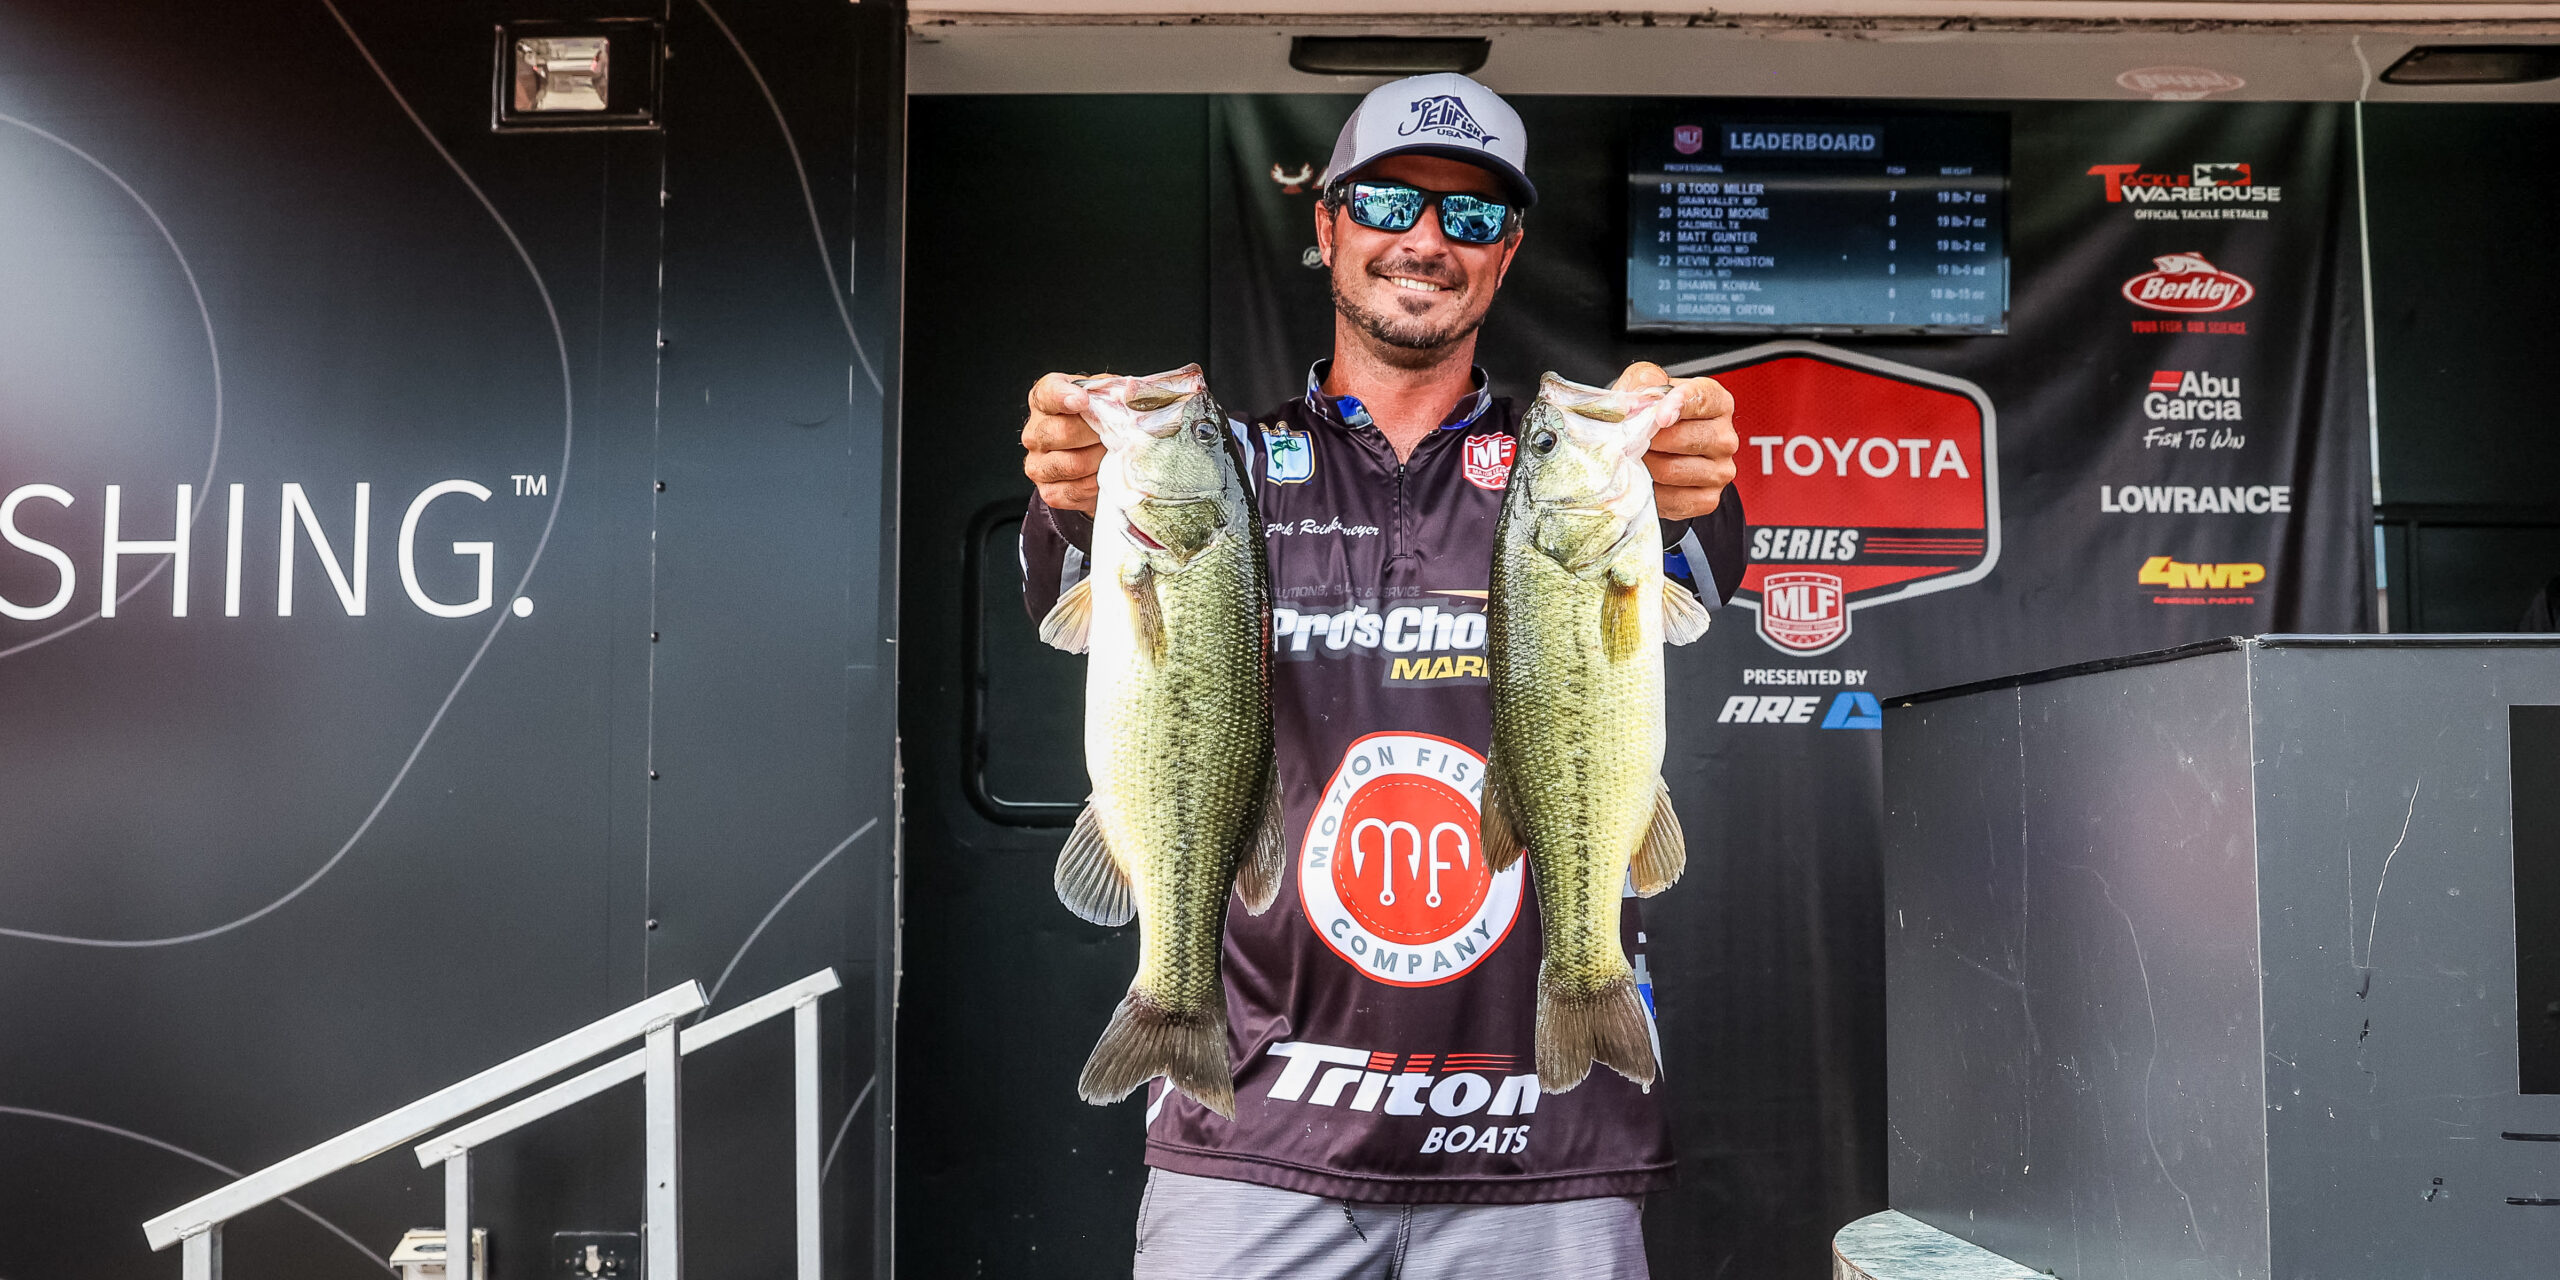 Reinkemeyer Eases Into the Lead at Truman - Major League Fishing